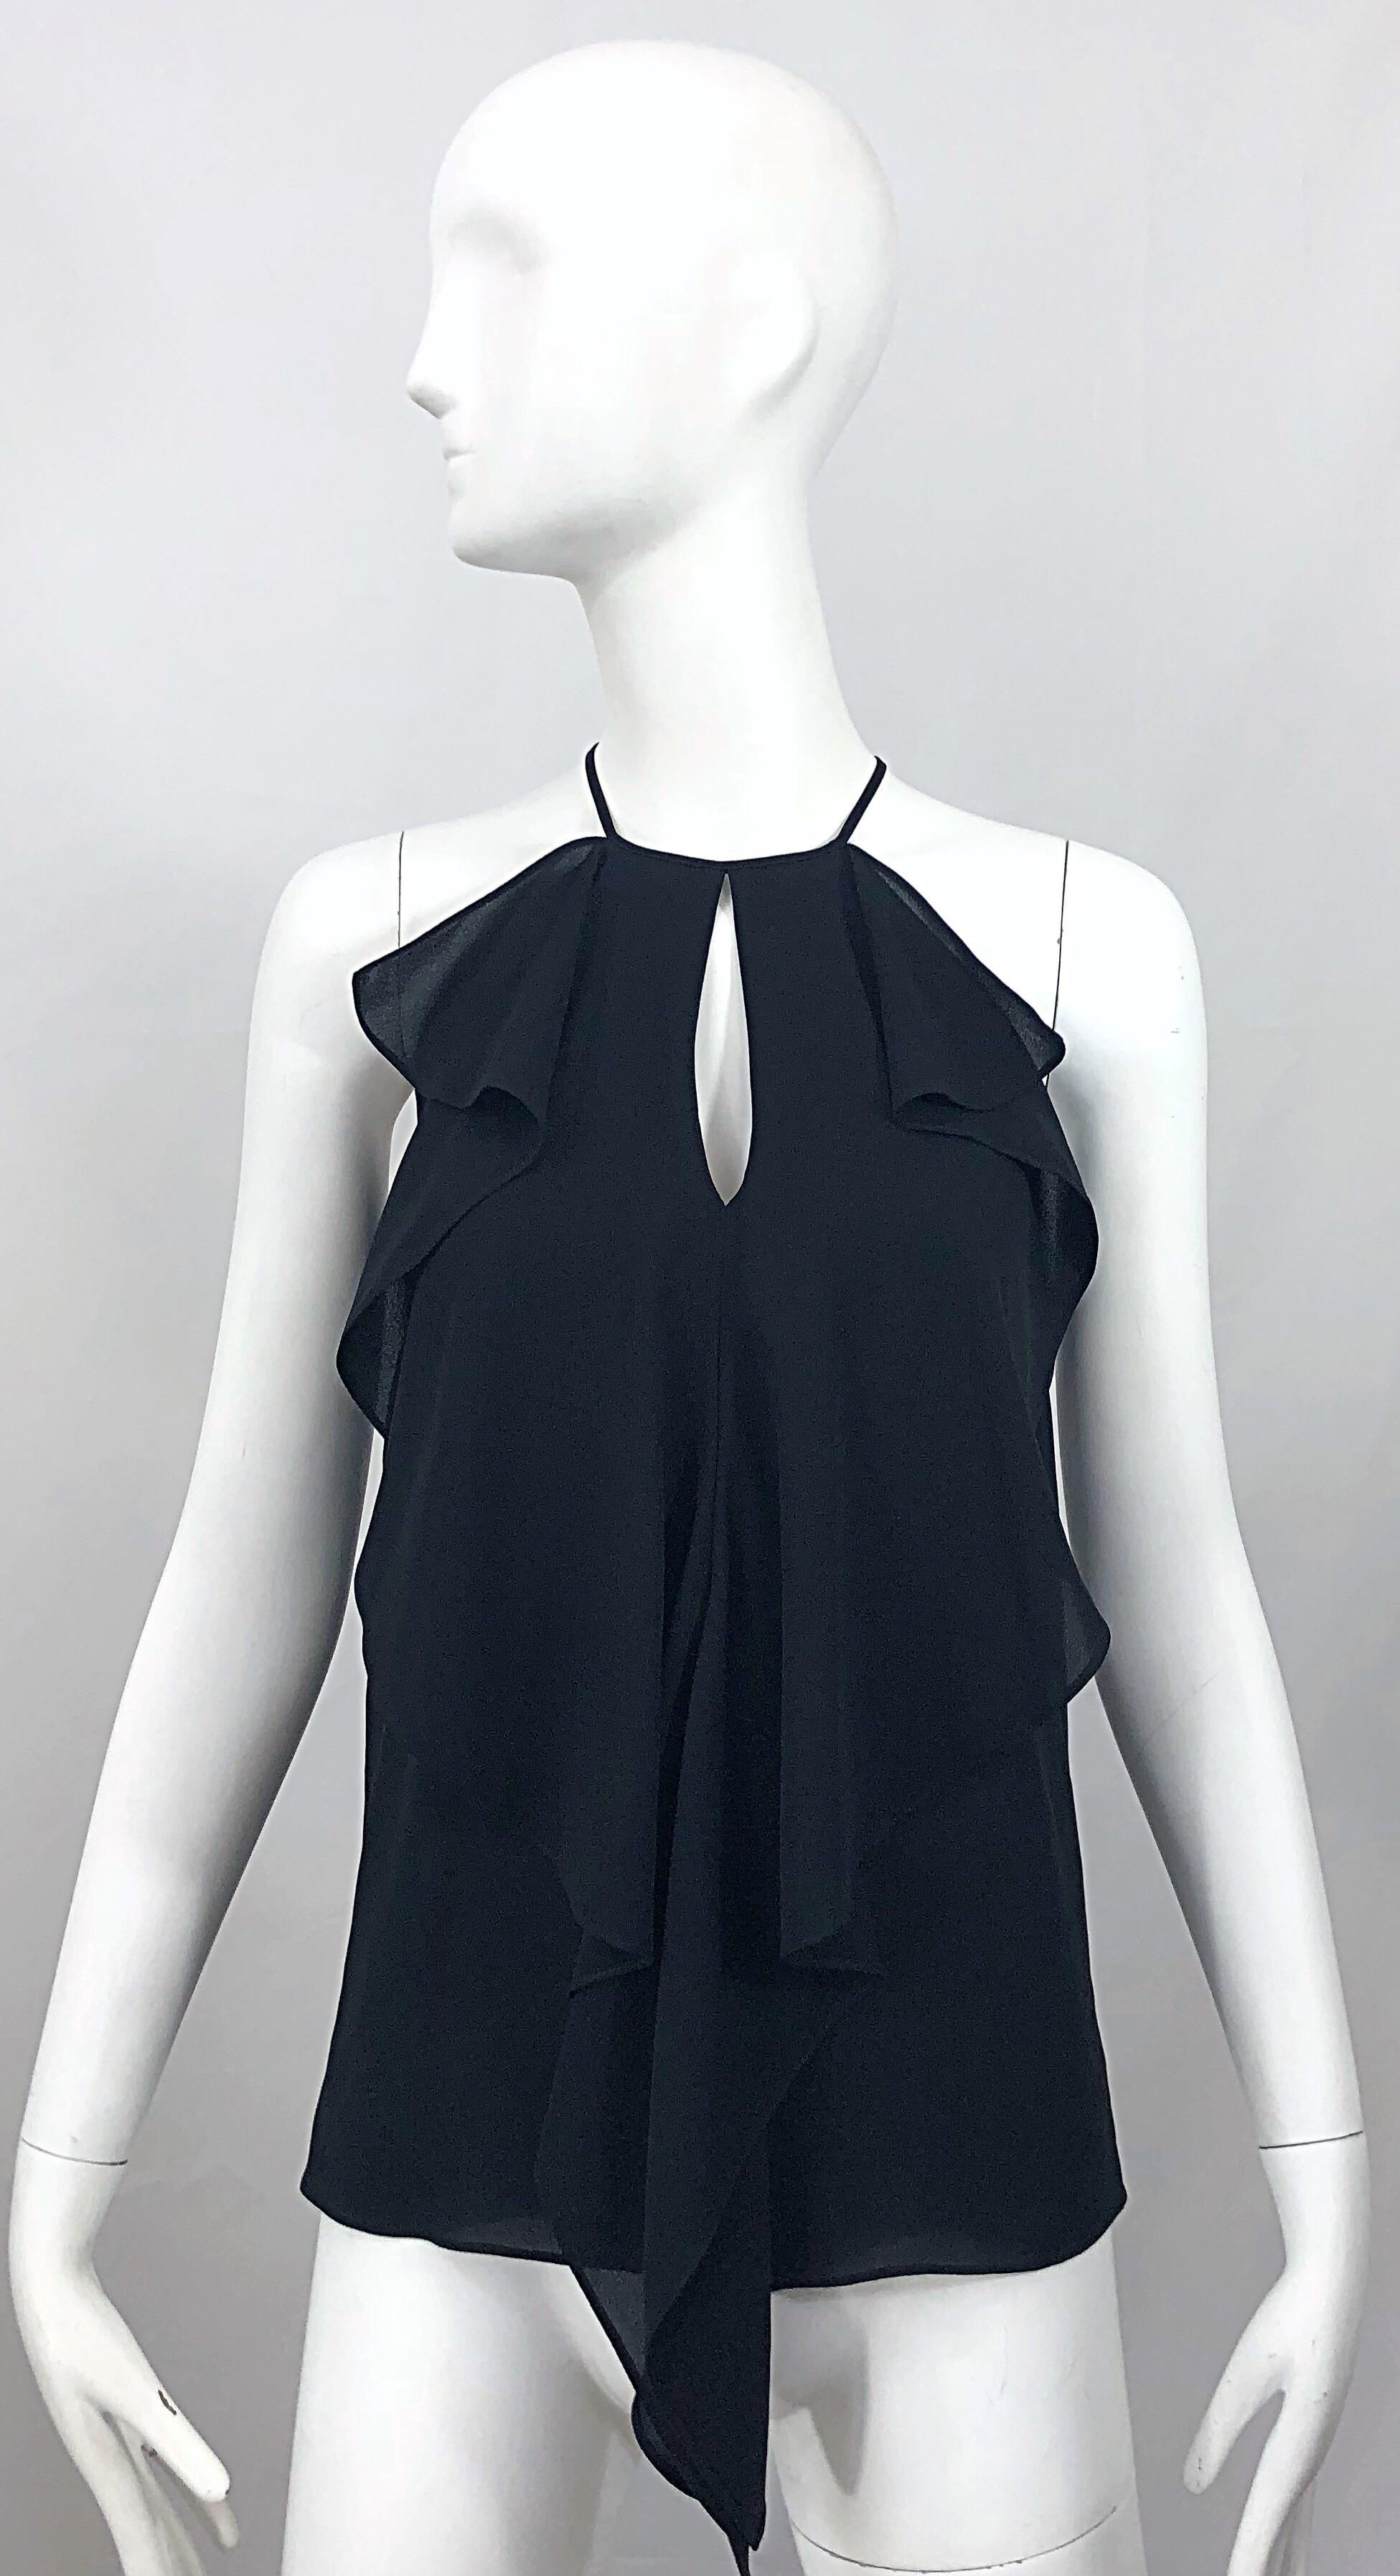 Stylish MICHAEL KORS COLLECTION black silk chiffon keyhole sleeveless flutter blouse! Features flattering chiffon drapes on each side, with a keyhole opening at center bust that reveals just the right amount of skin. Hidden zipper up the back with